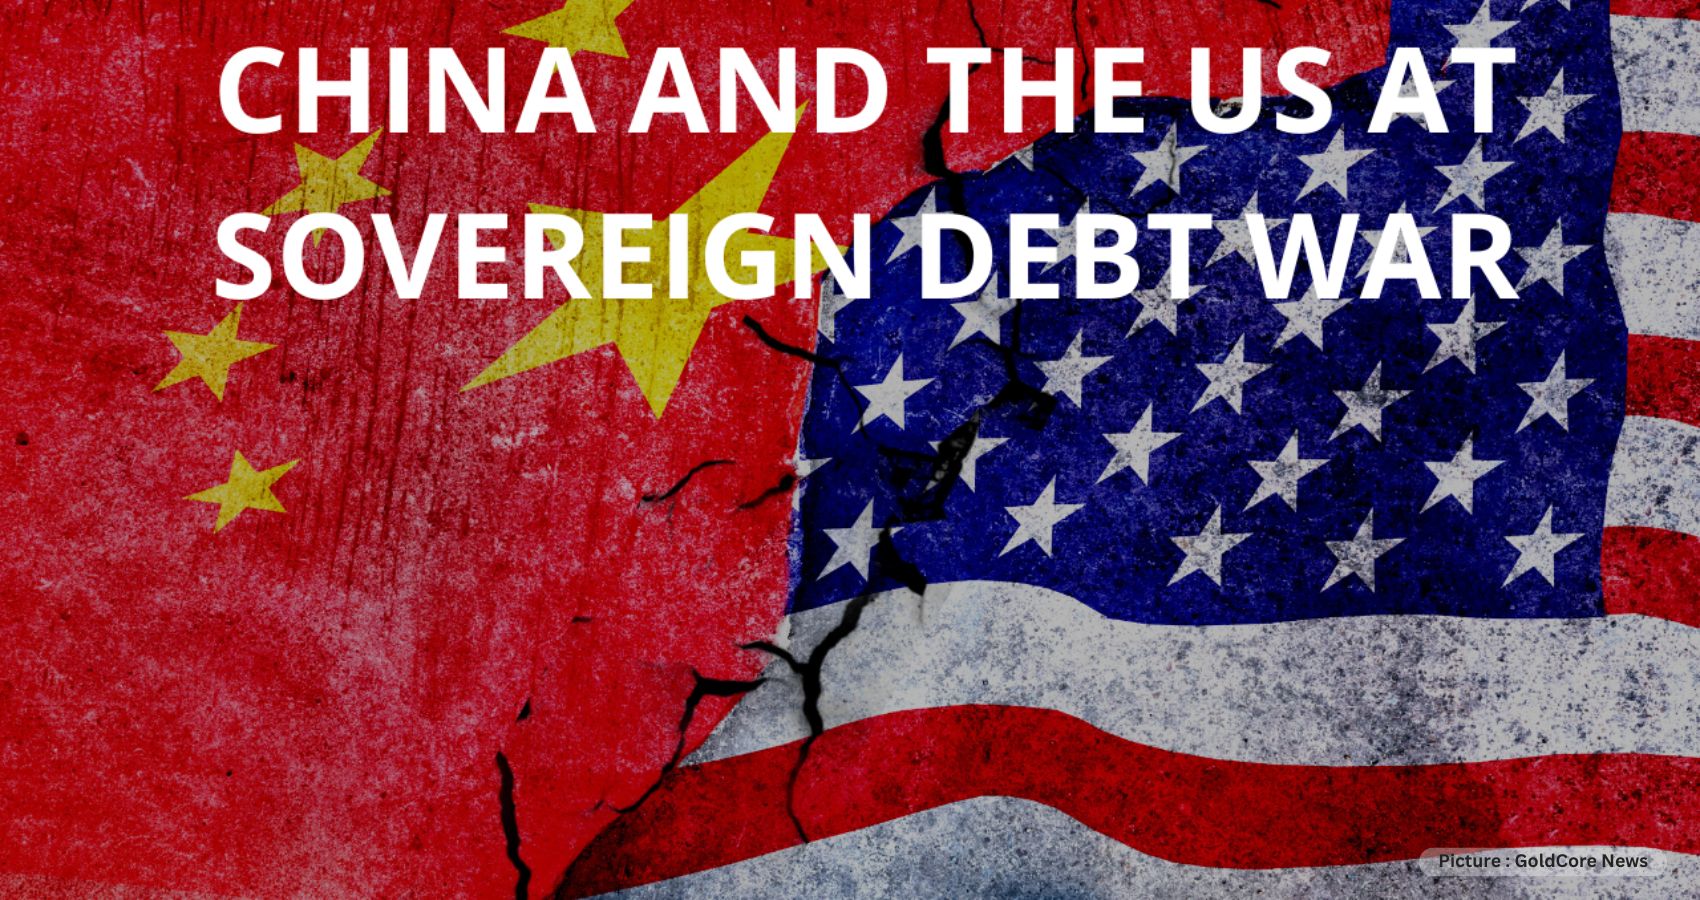 Time for the US to Hold China Accountable for Sovereign Debt